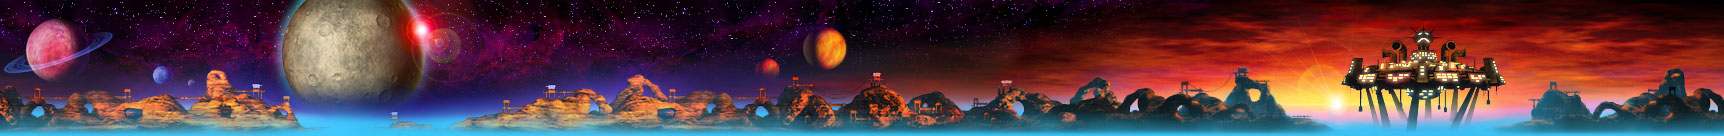 Background art used for the game.